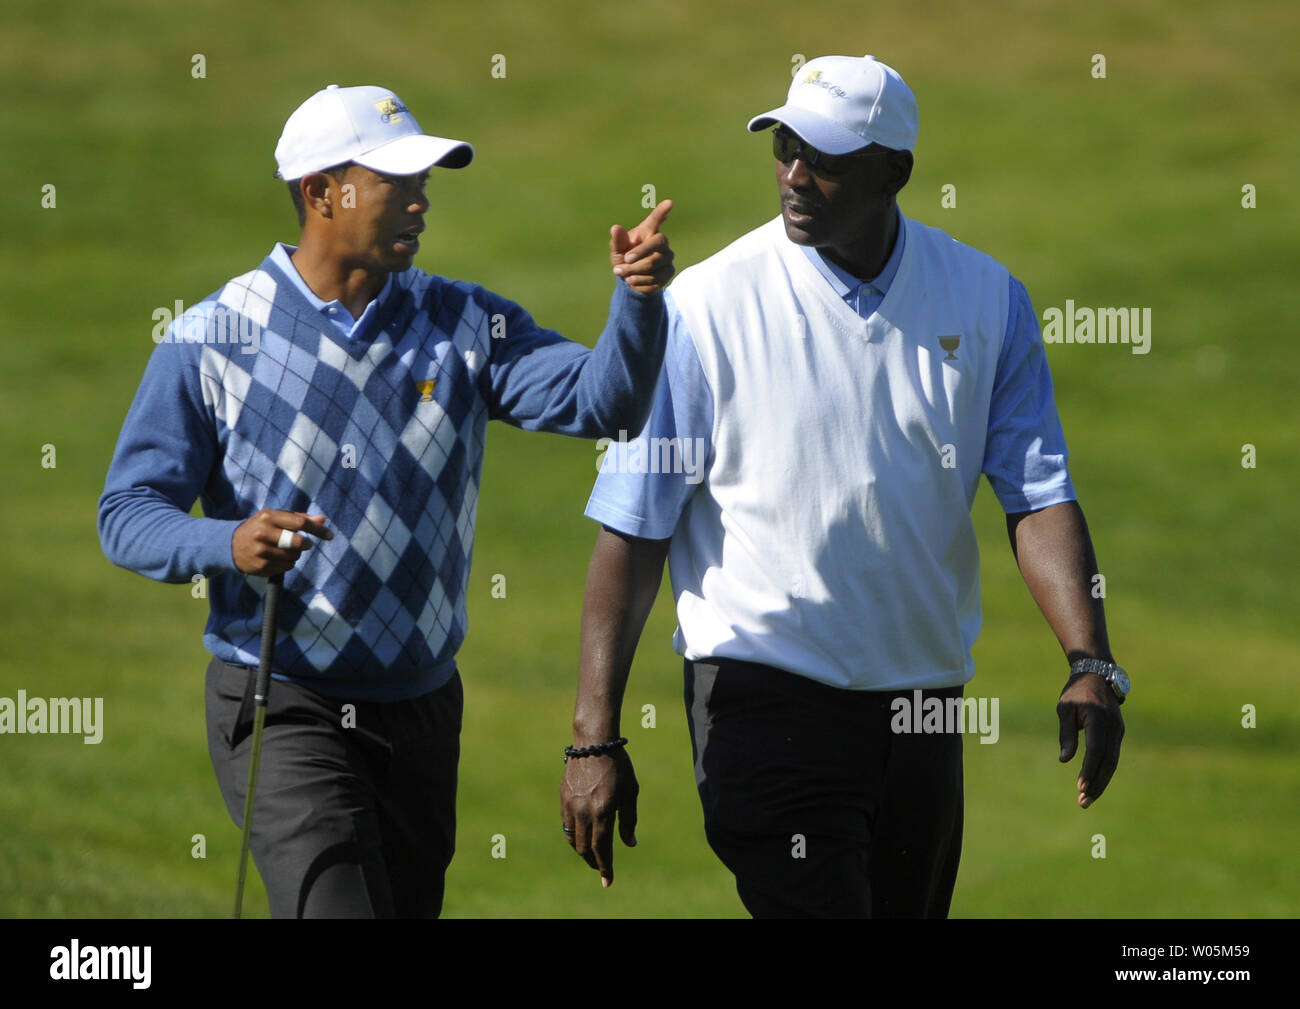 Tiger Woods (L) talks to basketball legend Michael Jordan as they walk down the 15th fairway during a practice round prior to the start of The Presidents Cup at Harding Park Golf Course in San Francisco, California on October 7, 2009.    UPI/Kevin Dietsch Stock Photo